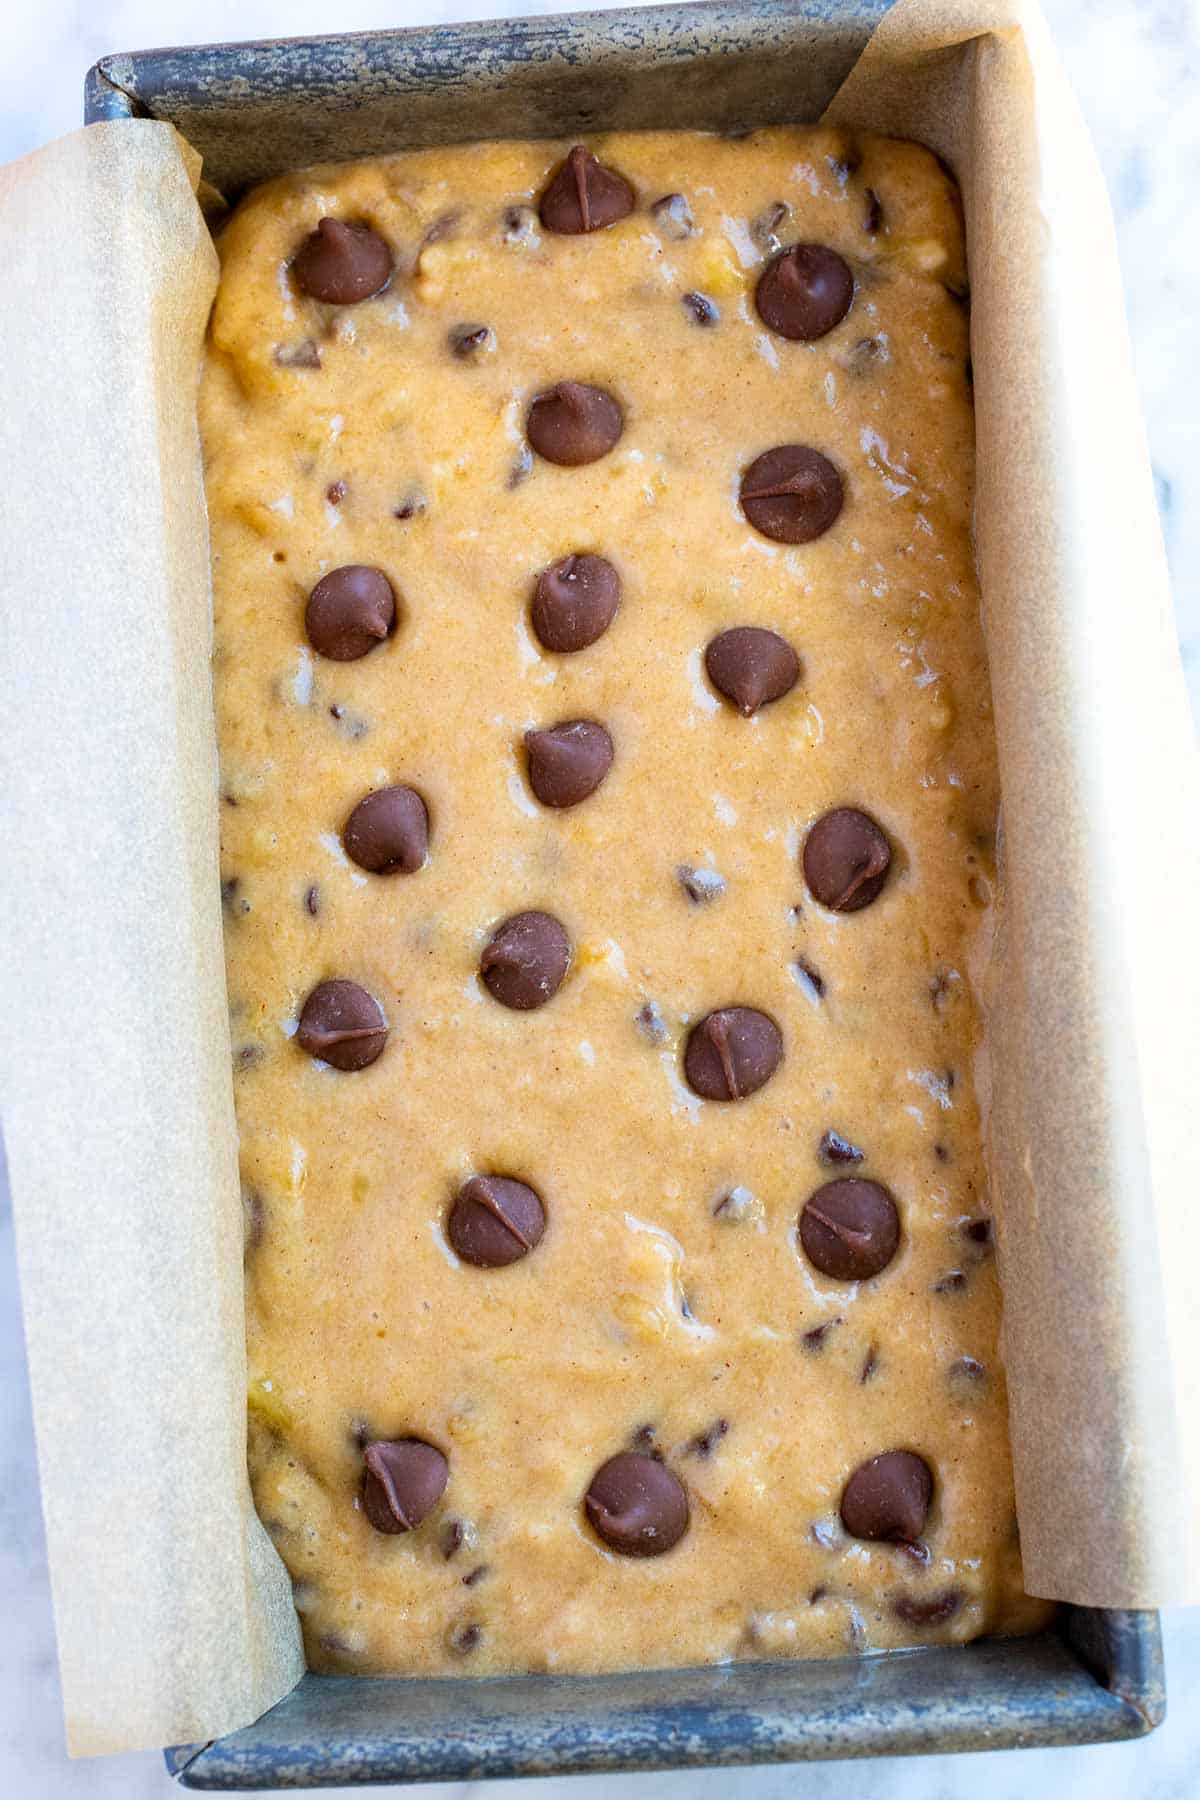 Adding some extra chocolate chips to the top of the banana bread batter in the loaf pan.